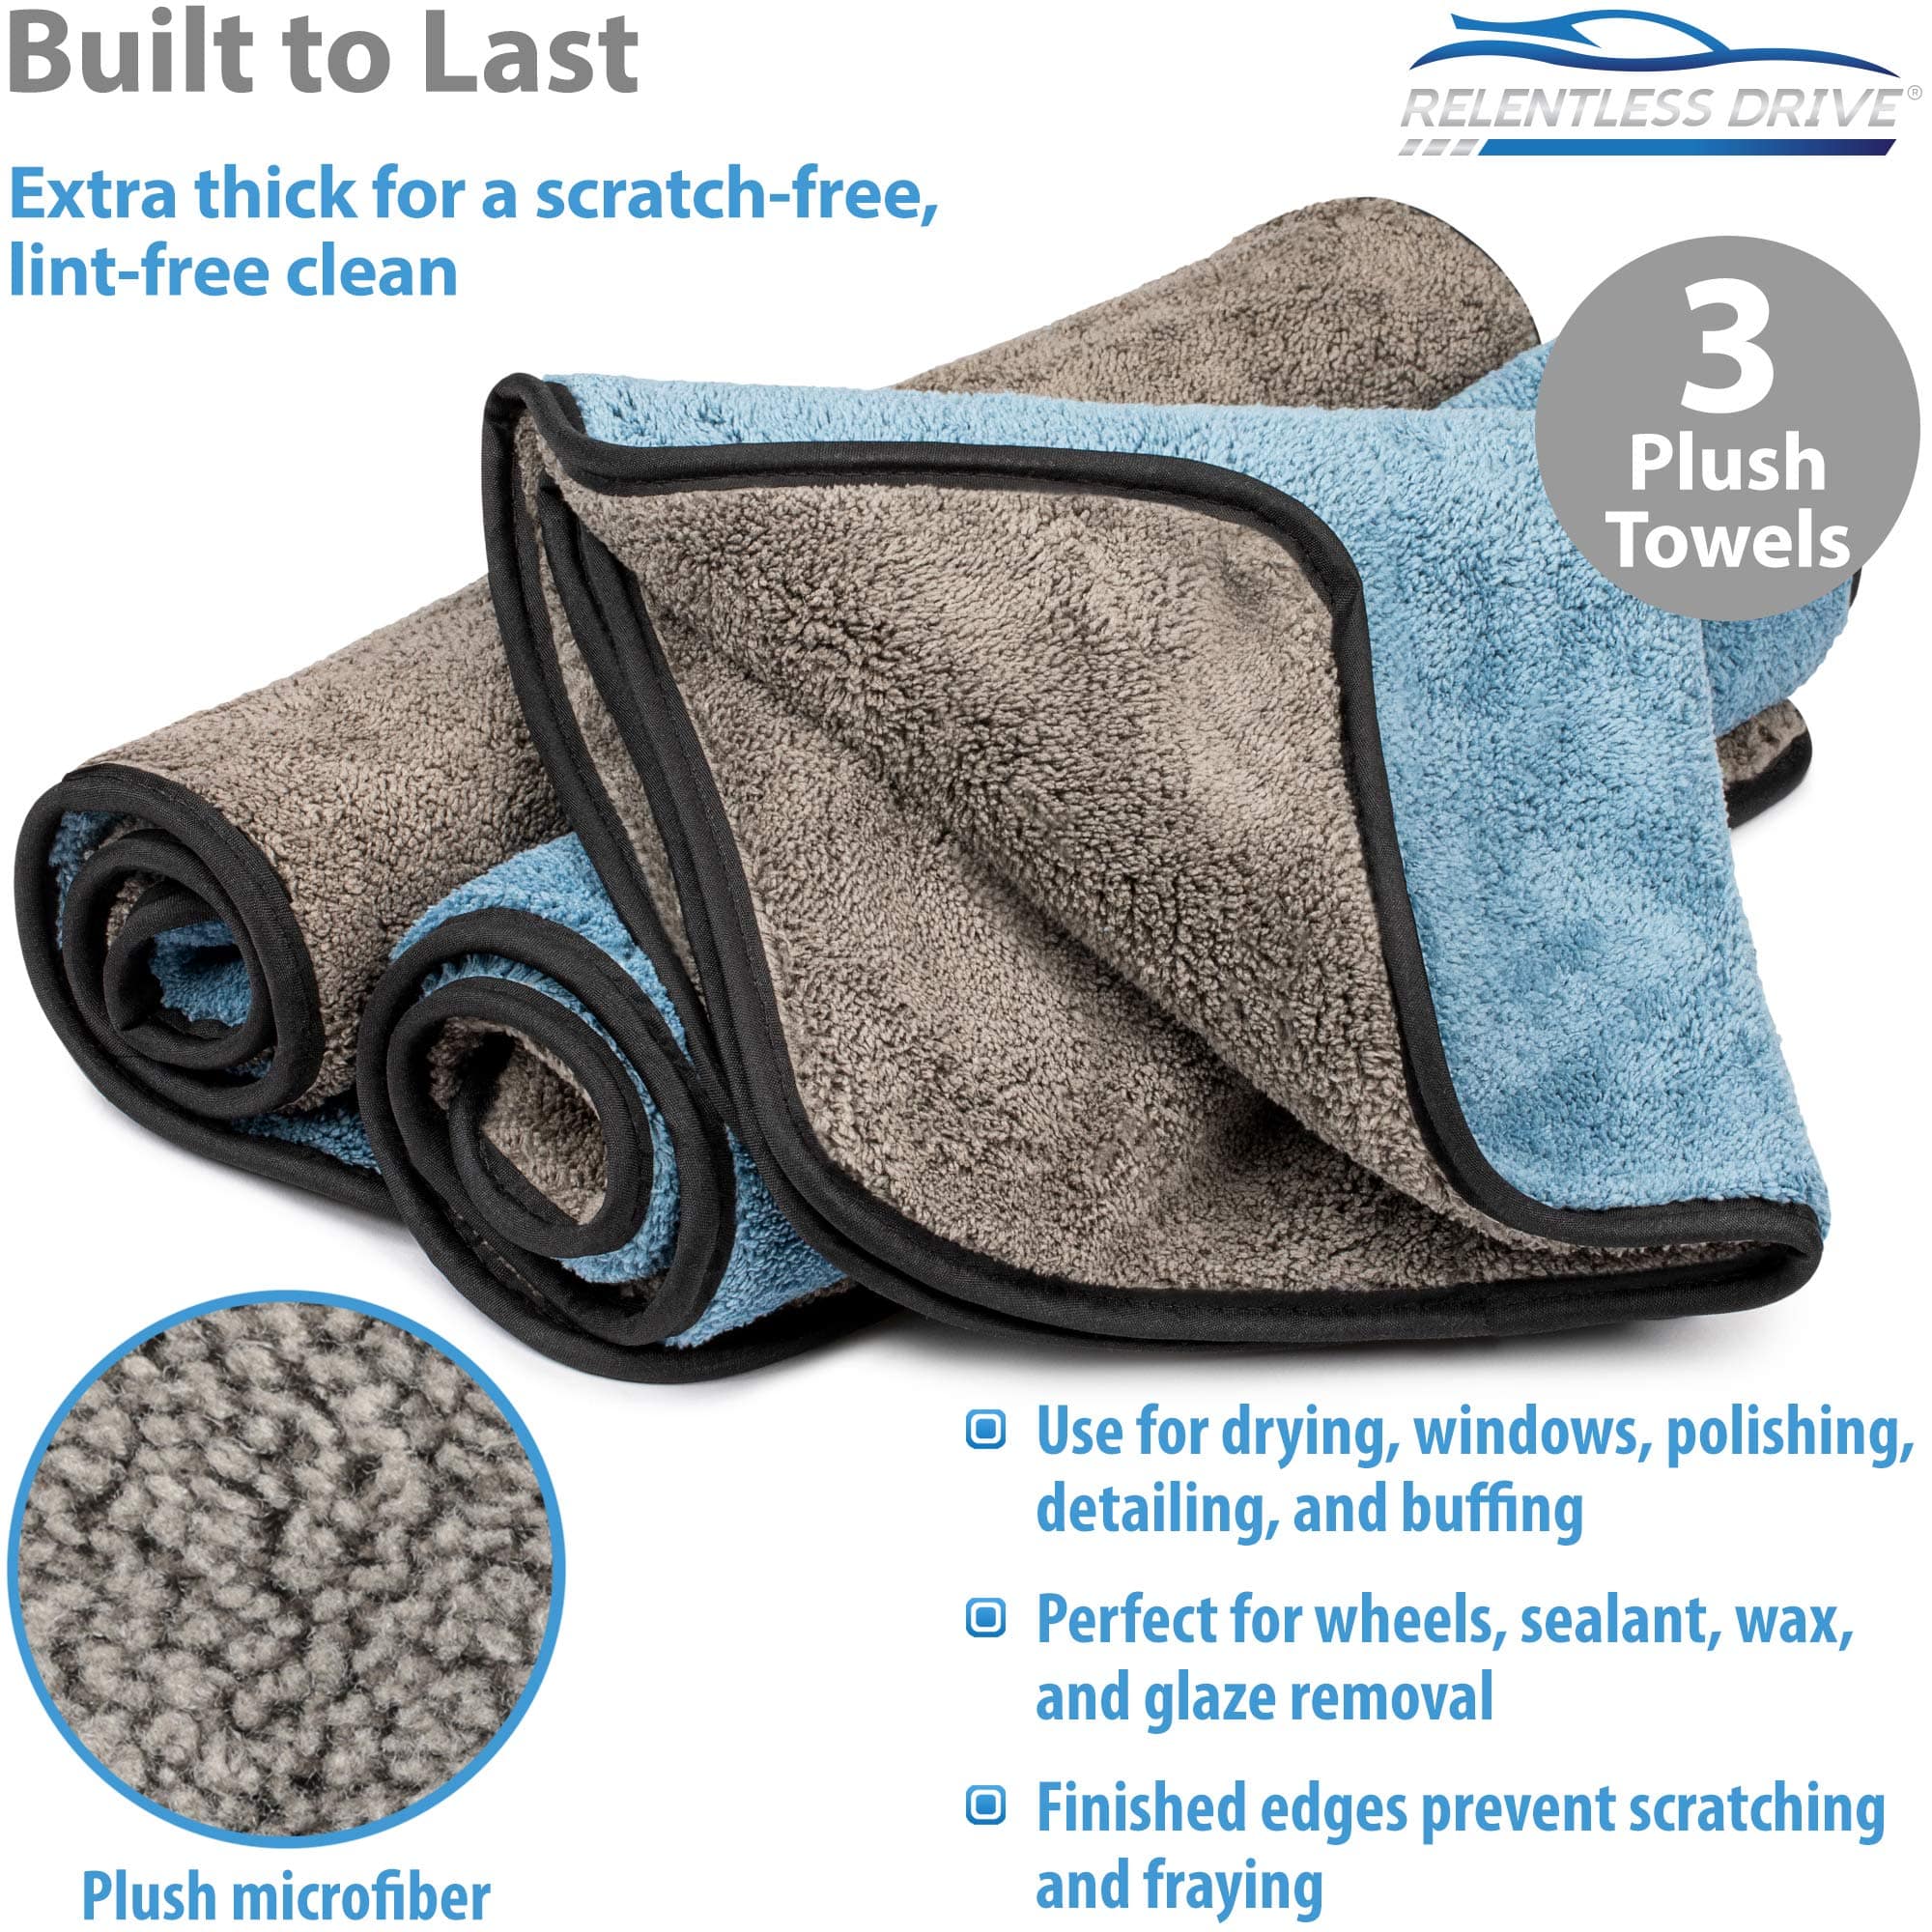 Relentless Drive Large Car Drying Towel 24” x 60” (5 Pack) - Microfiber  Towels for Cars - Ultra Absorbent Drying Towels for Cars, Boats, & SUVs -  Car